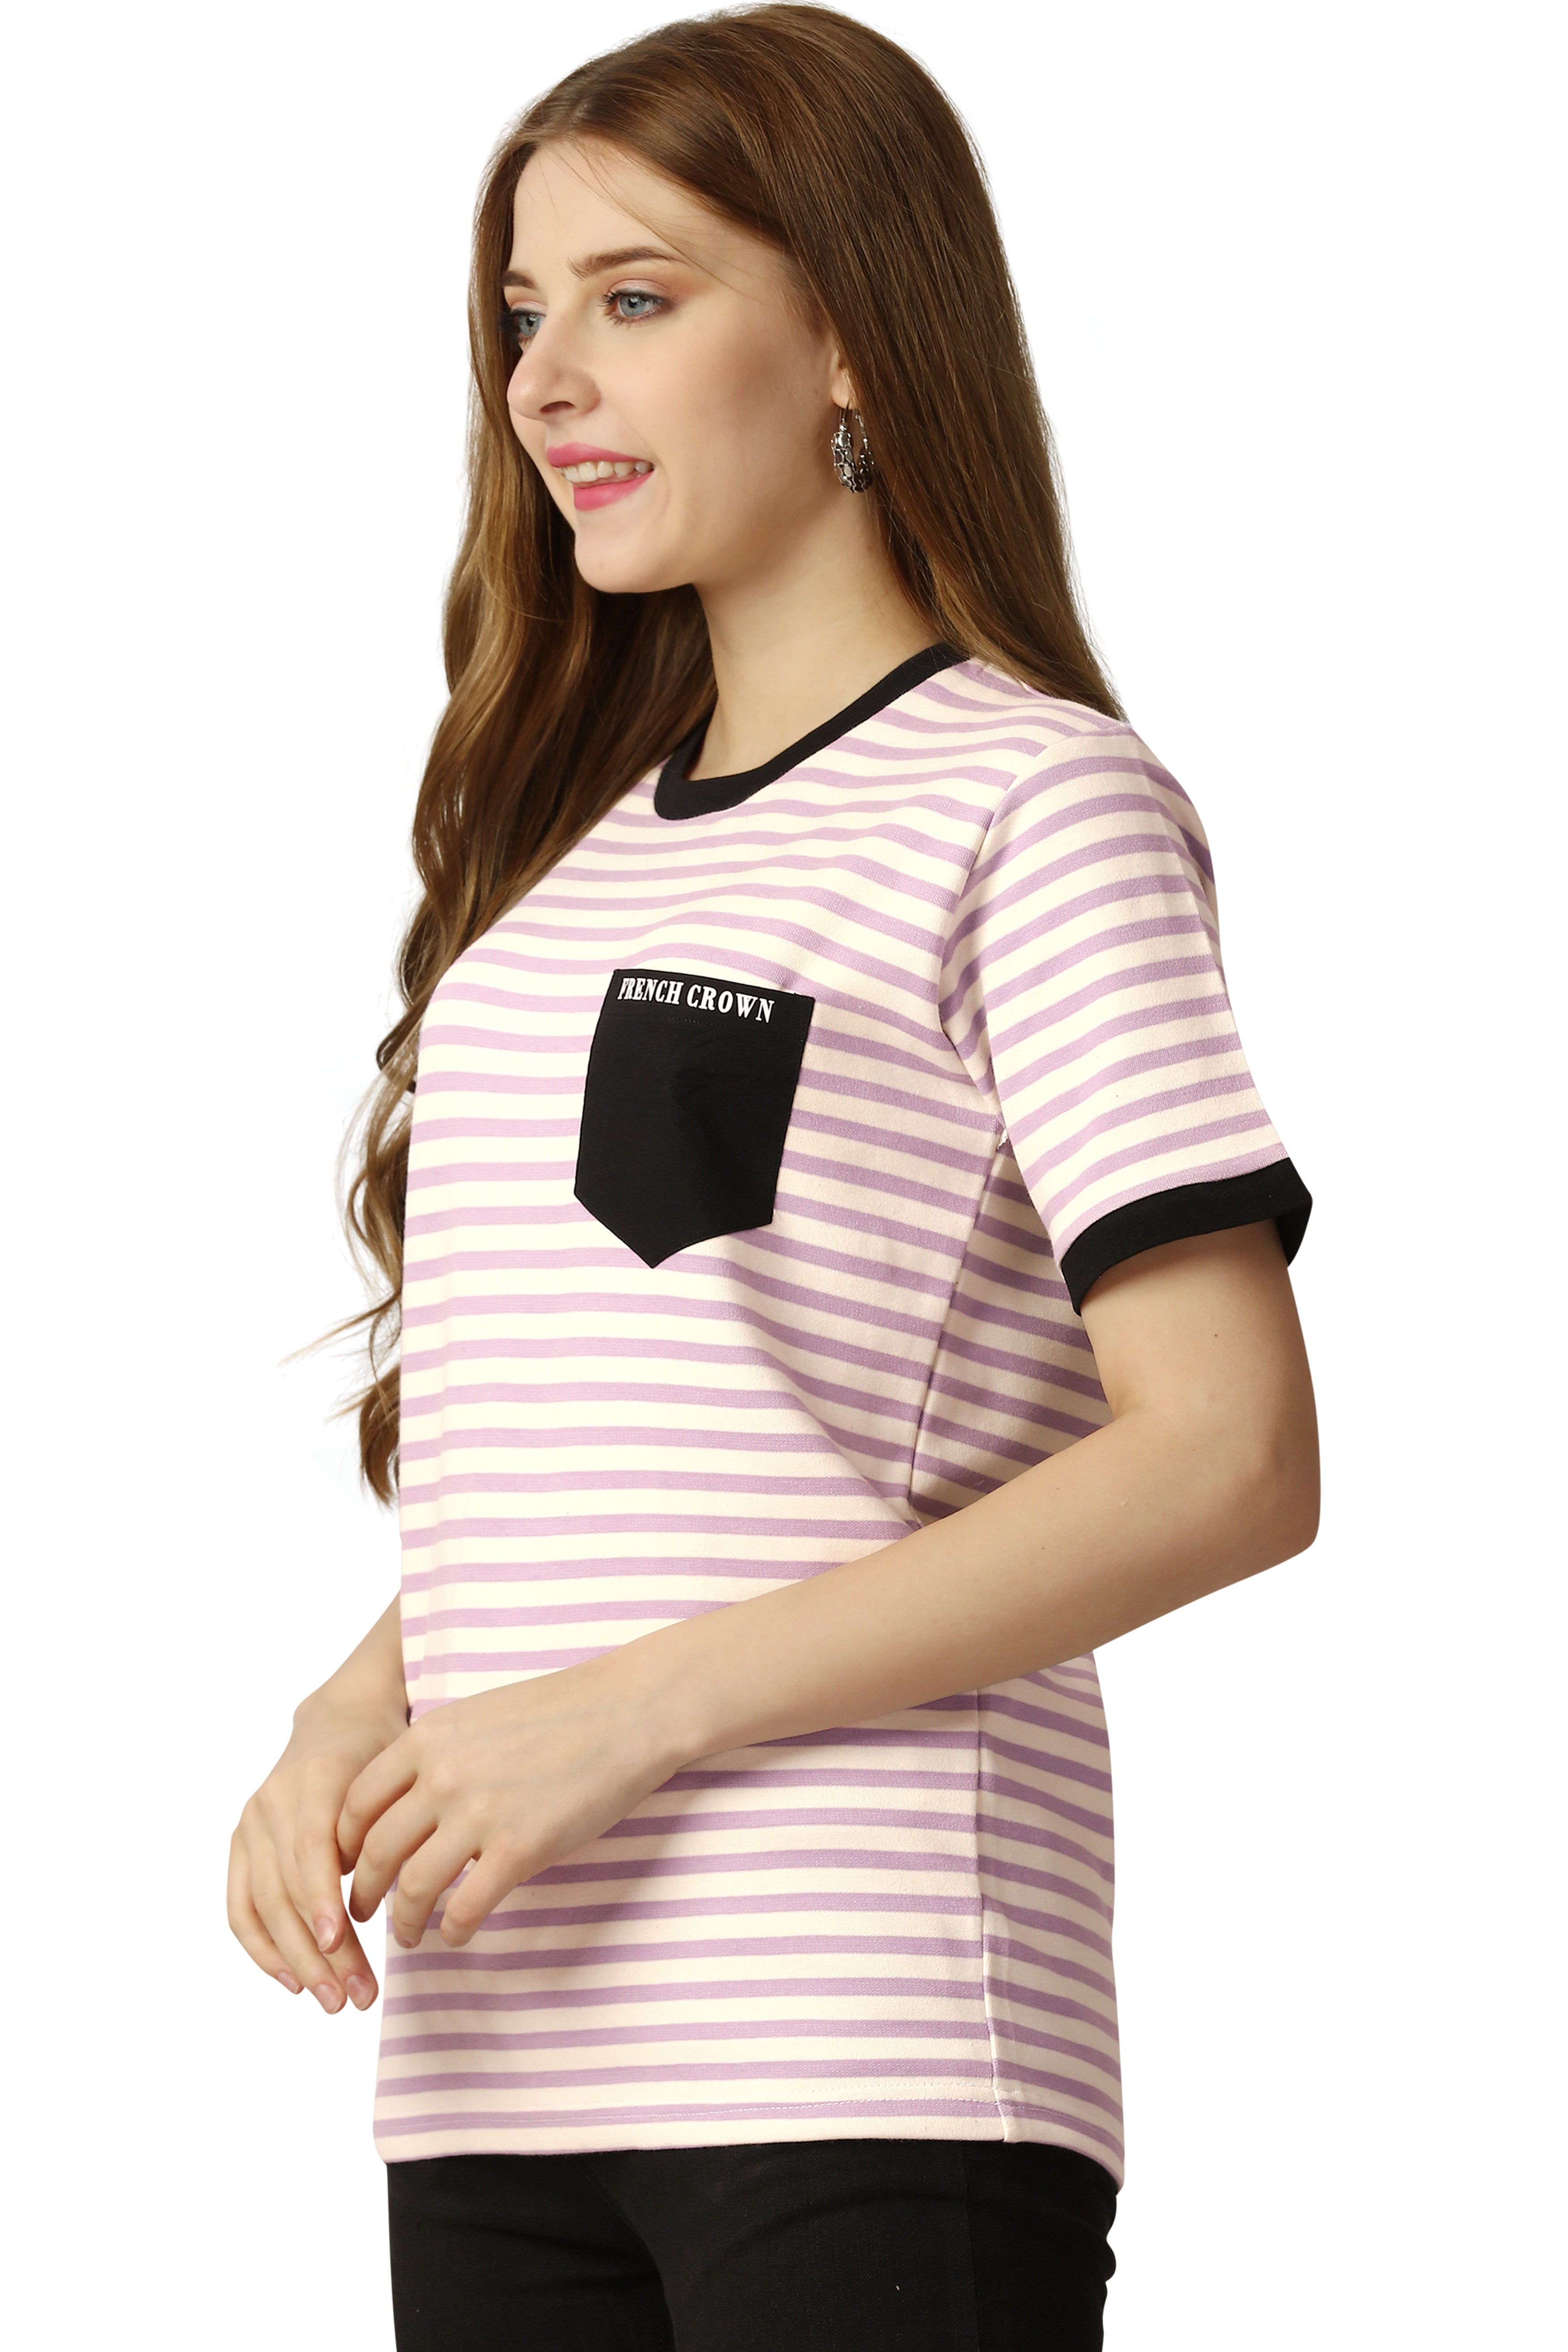 Cosmos Peach with Cavern Pink Striped Jersey T-shirt